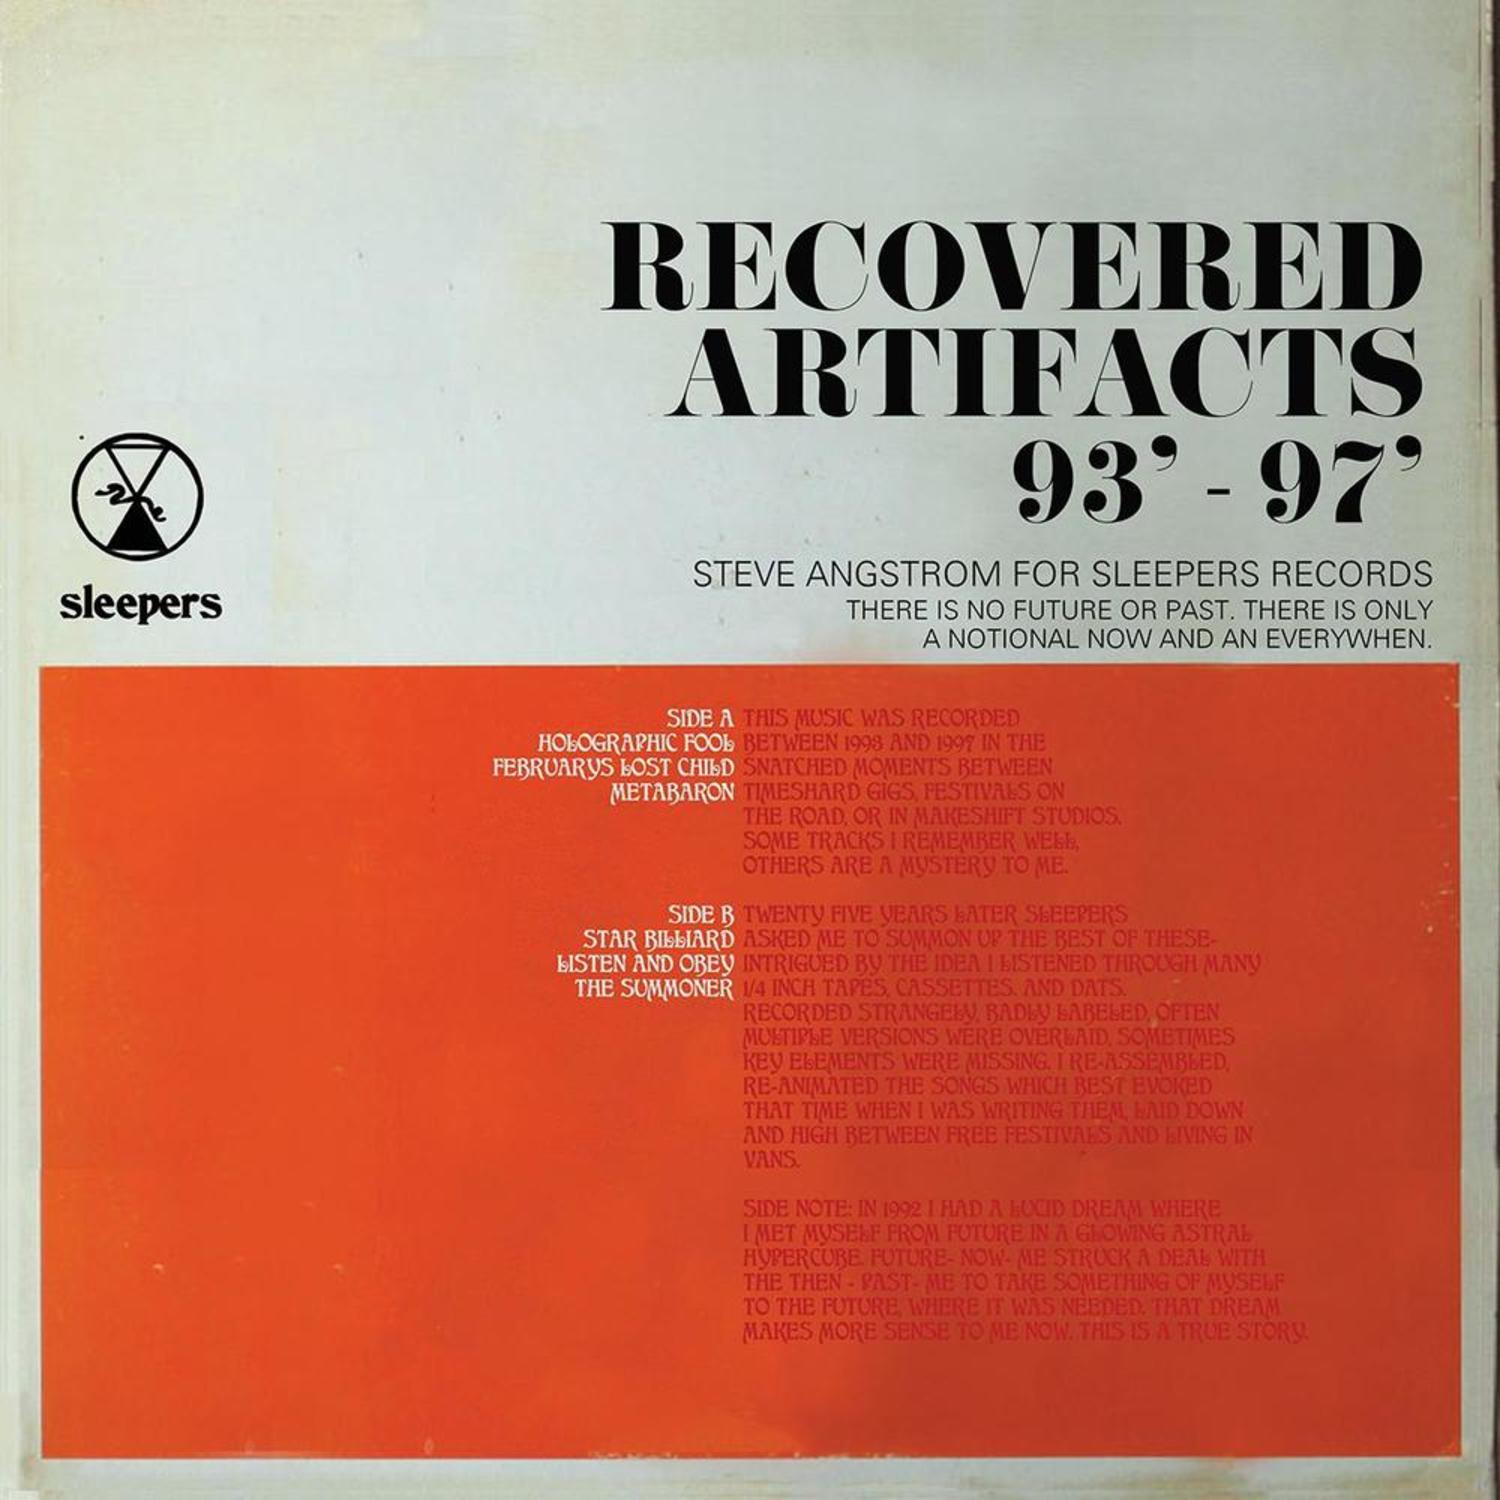 Steve Angstrom - RECOVERED ARTIFACTS 93-97